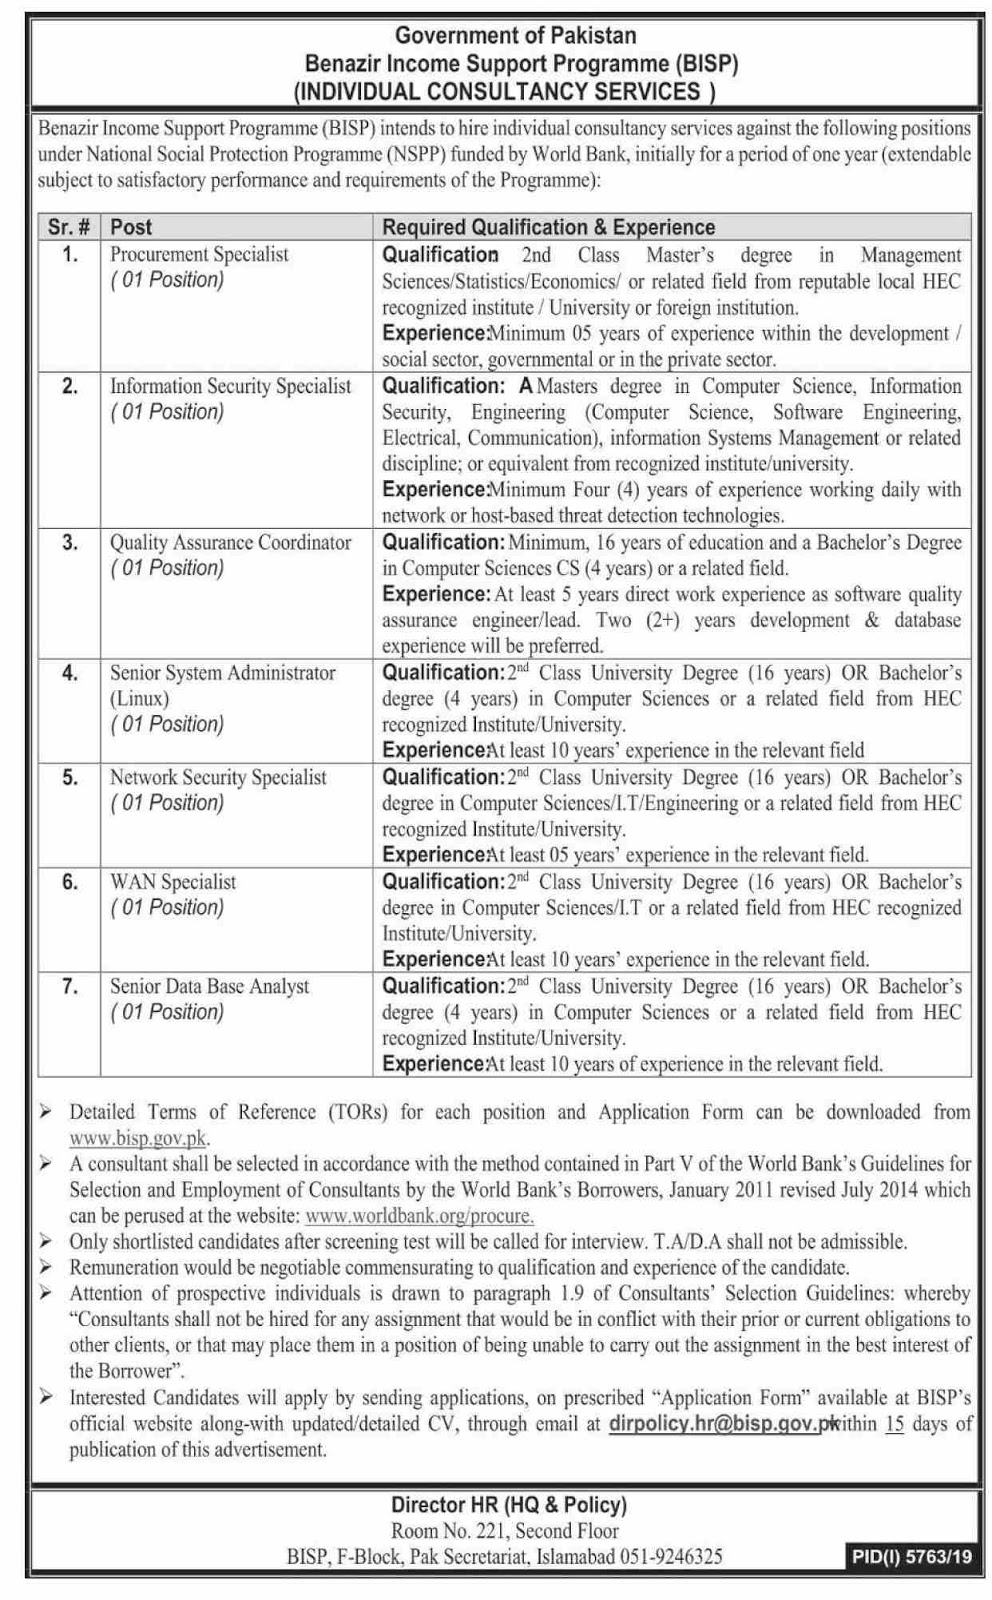 Benazir Income Support Programme jobs 2020